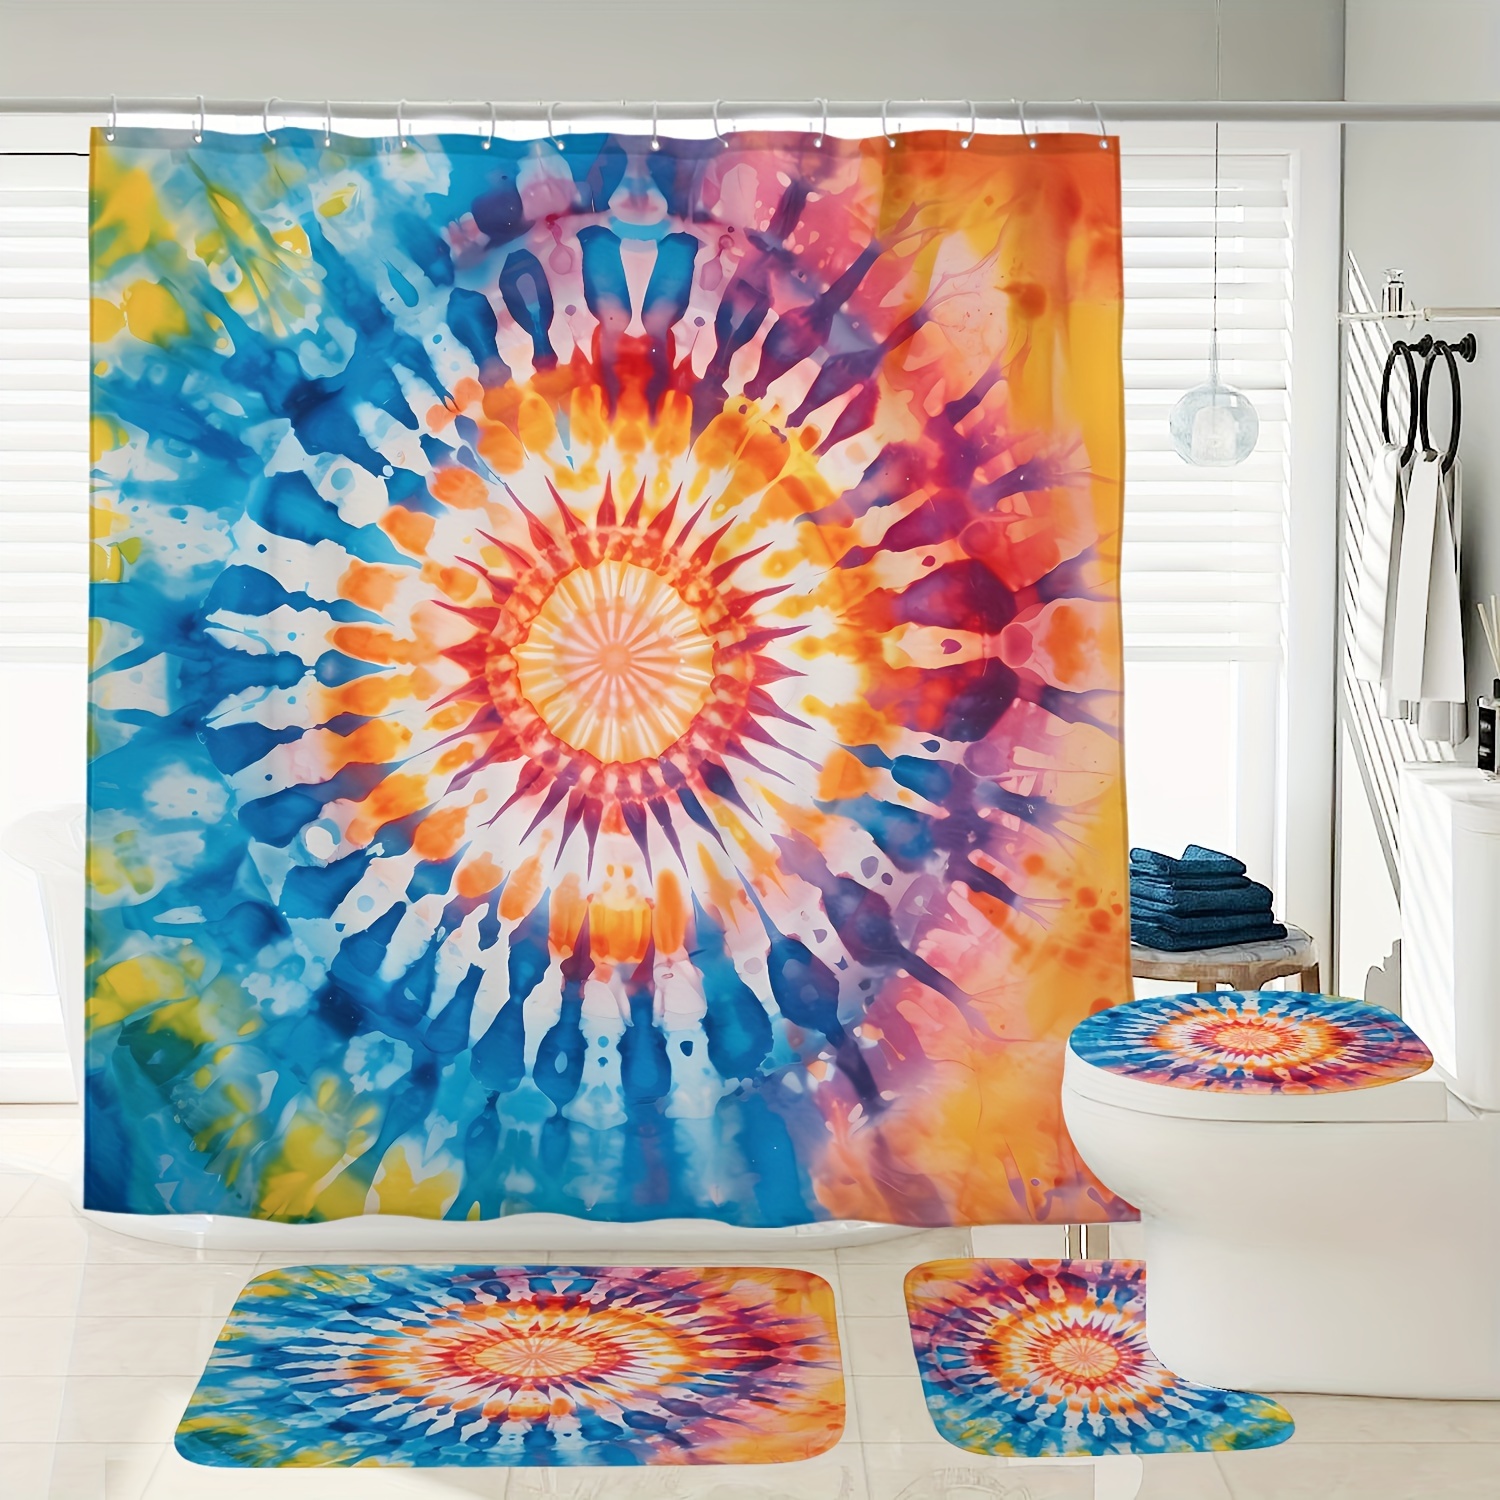 

Mandala Shower Curtain Set With Non-slip Bath Mats And Toilet Lid Cover, Polyester Waterproof Bathroom Decor With 12 Plastic Hooks - Woven, Cordless Design, No Needed